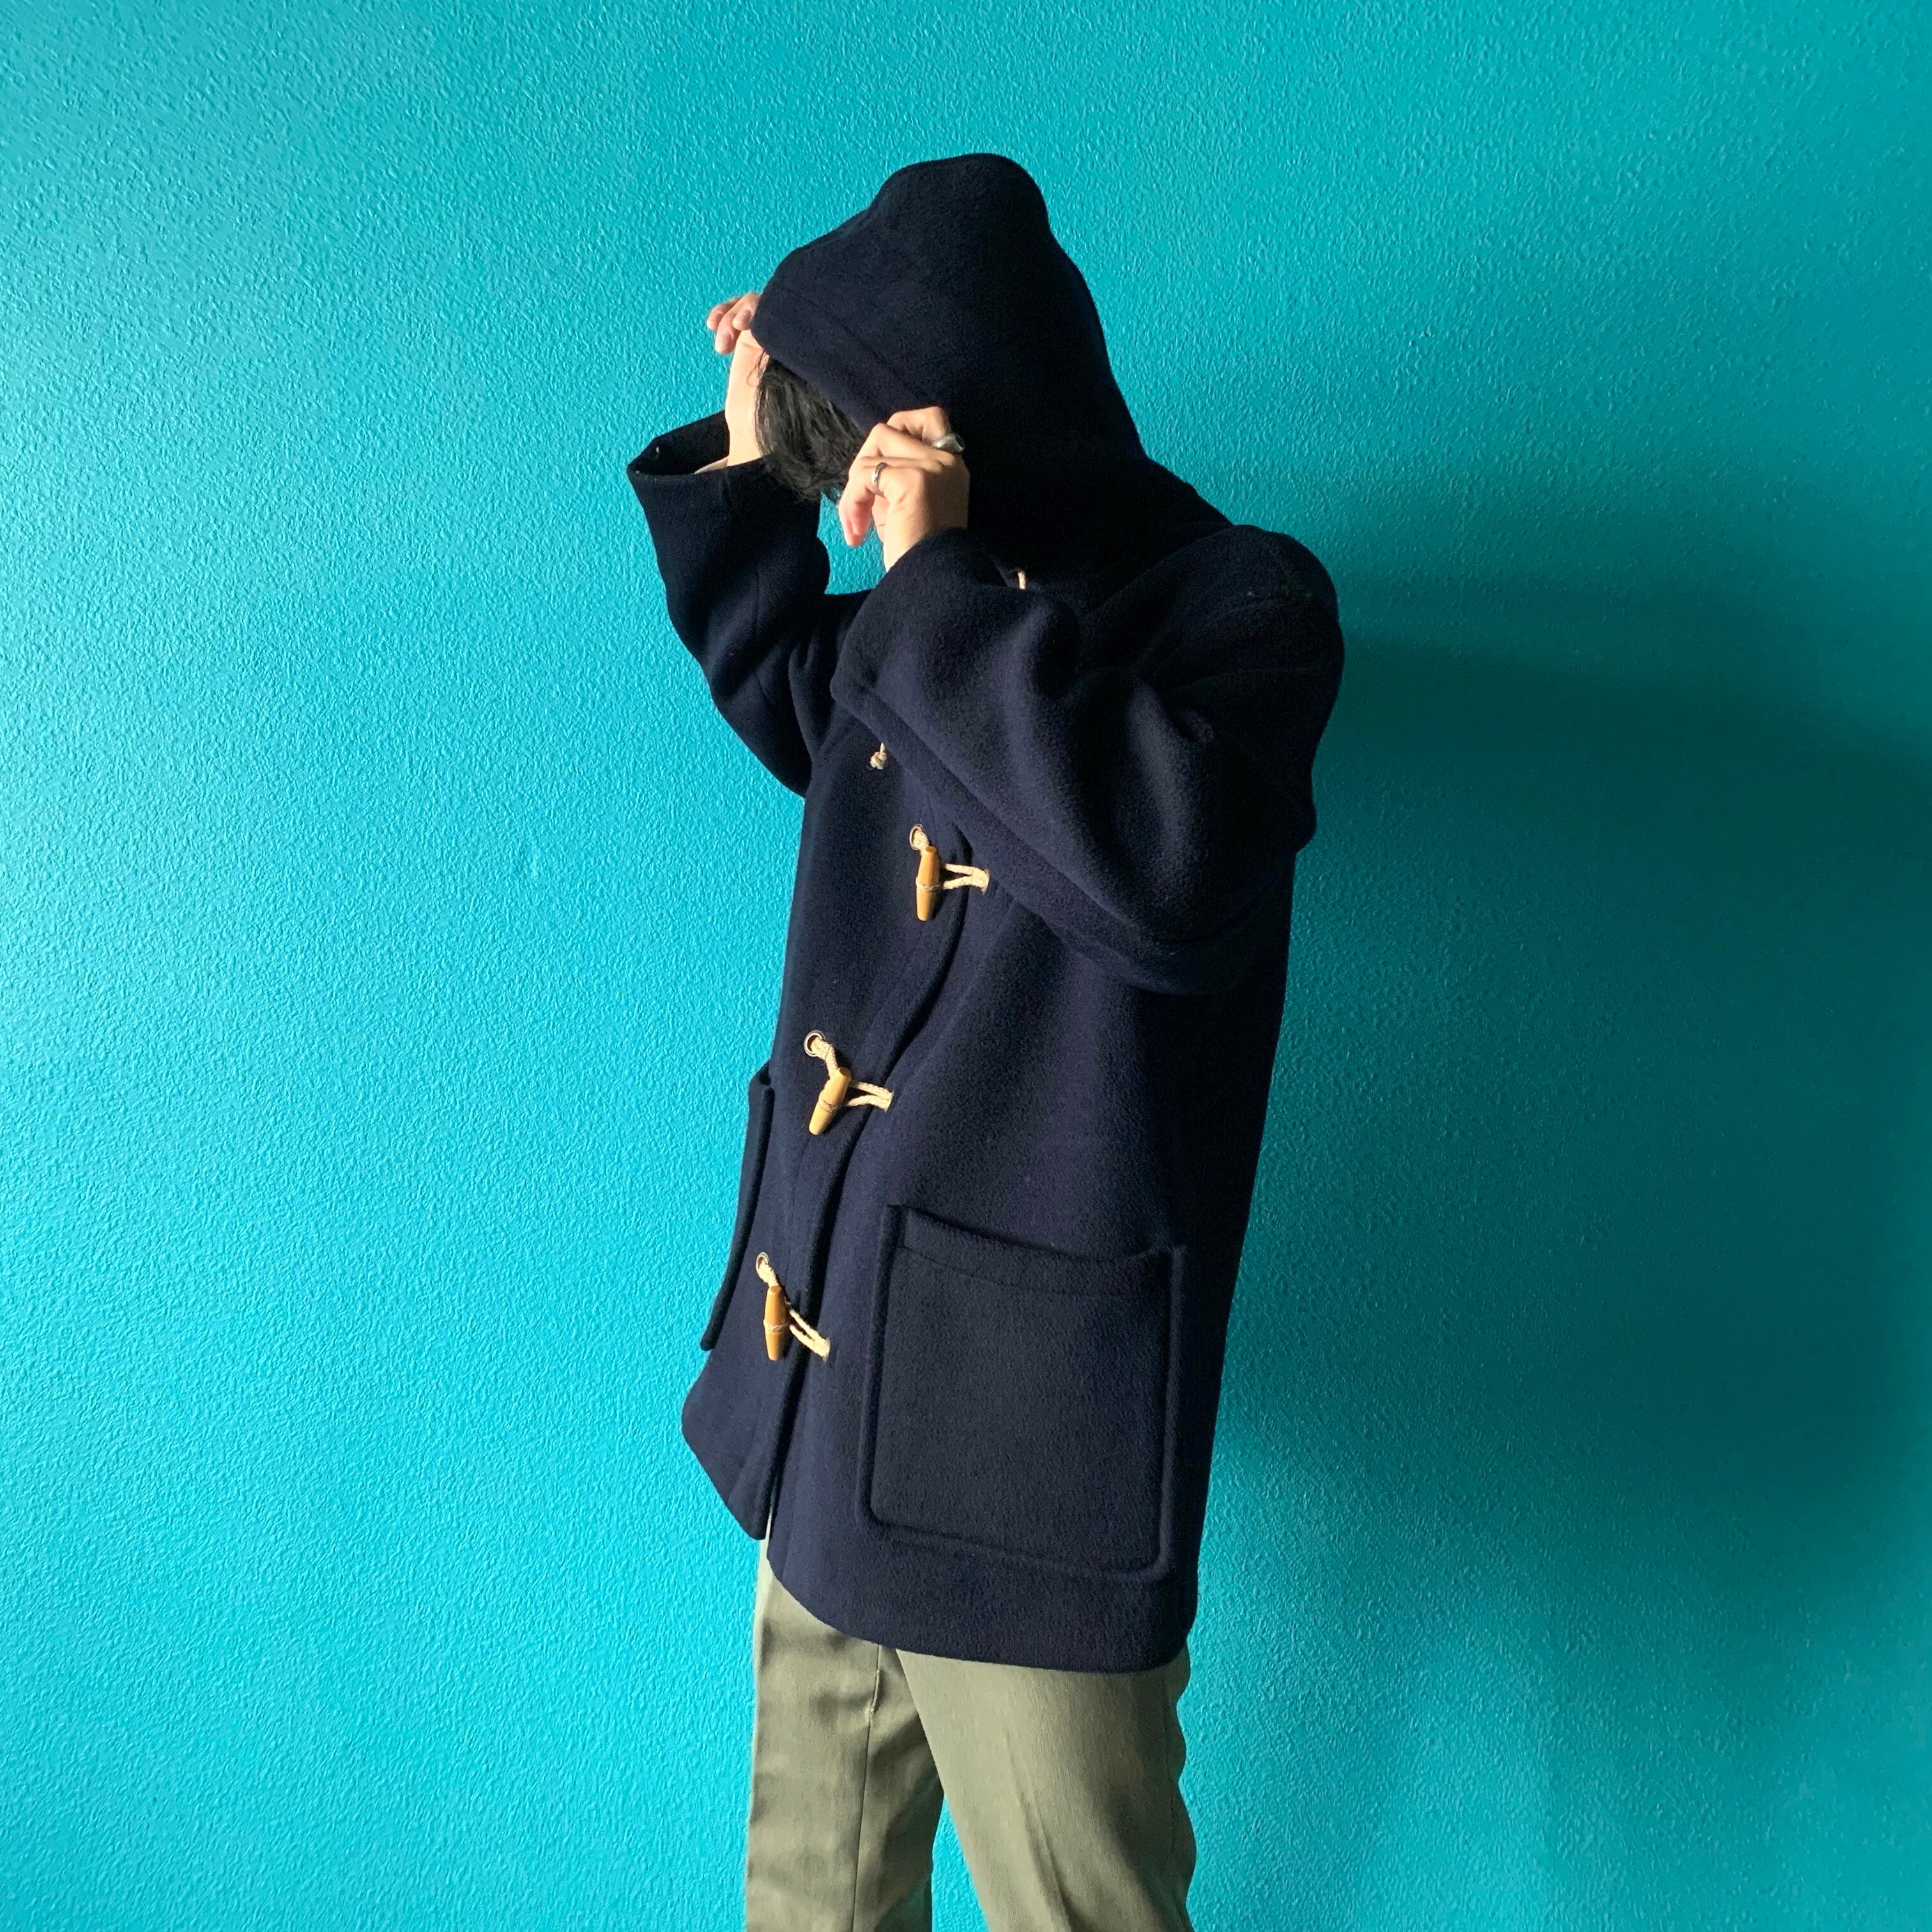 0193 / ~1990's gloverall duffle coat without shoulder cape